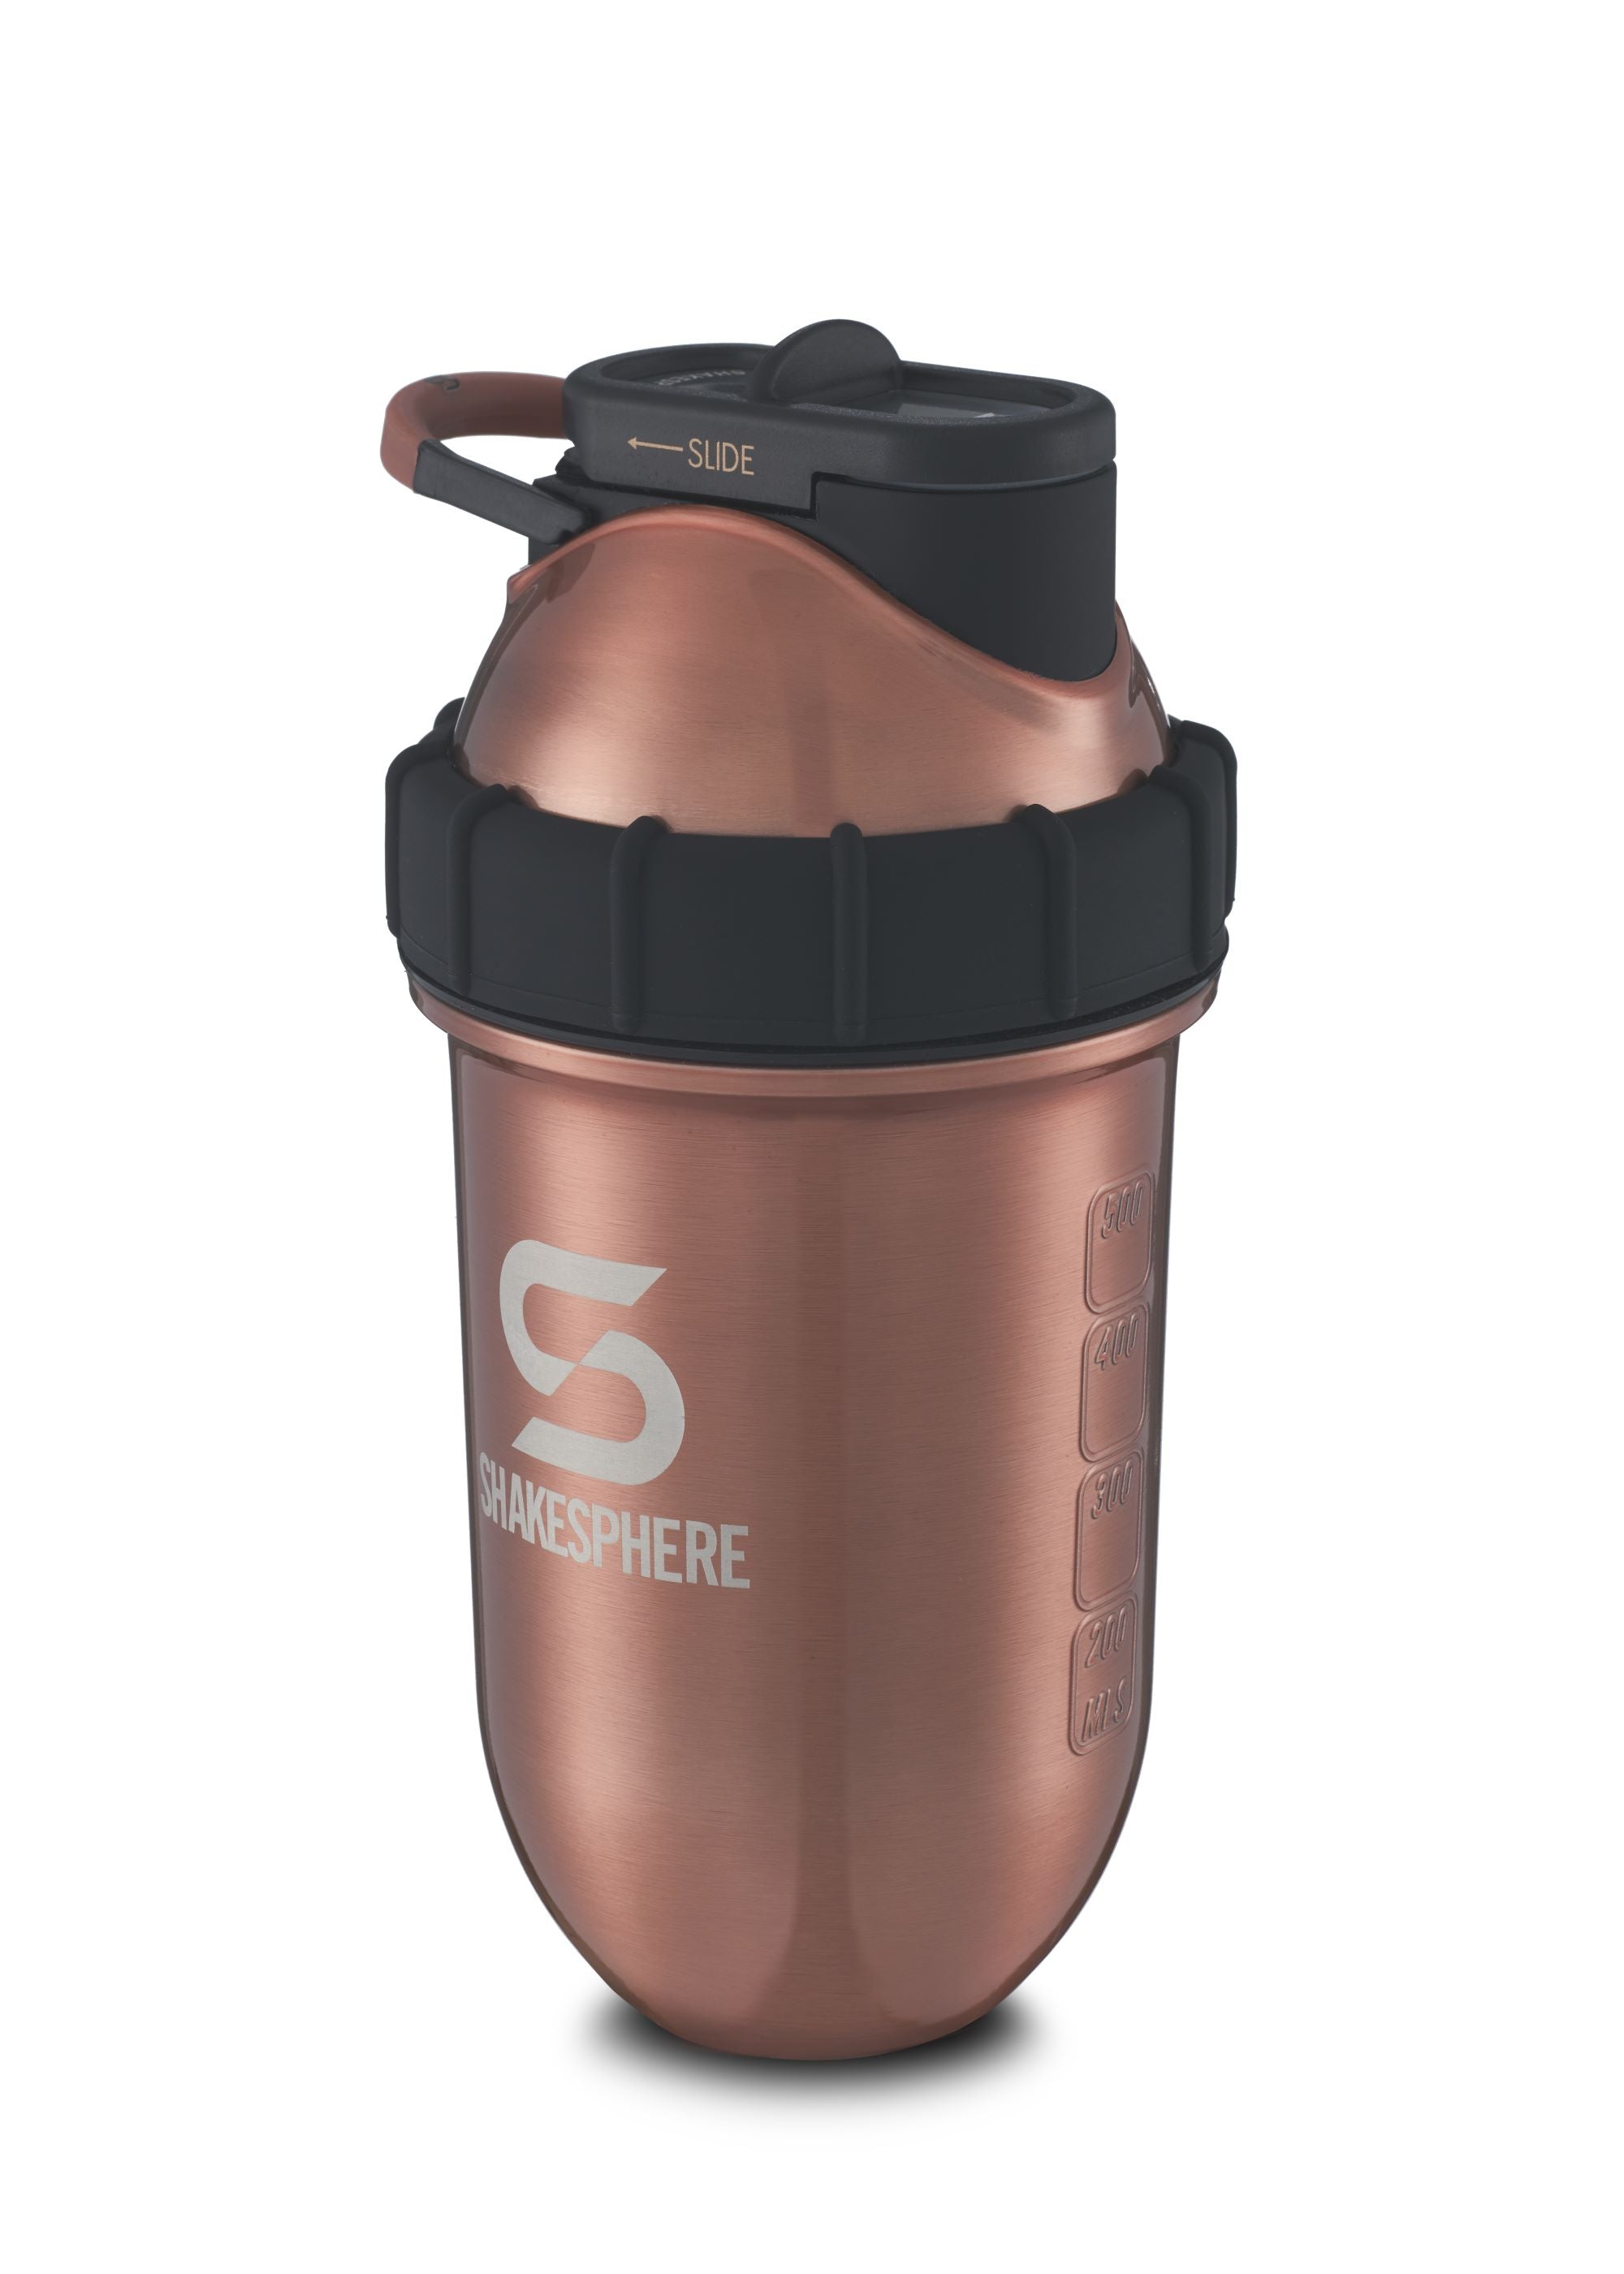 https://shakesphere.com/cdn/shop/products/SHAKESPHERE_THERMOS_COPPER.jpg?v=1682001056